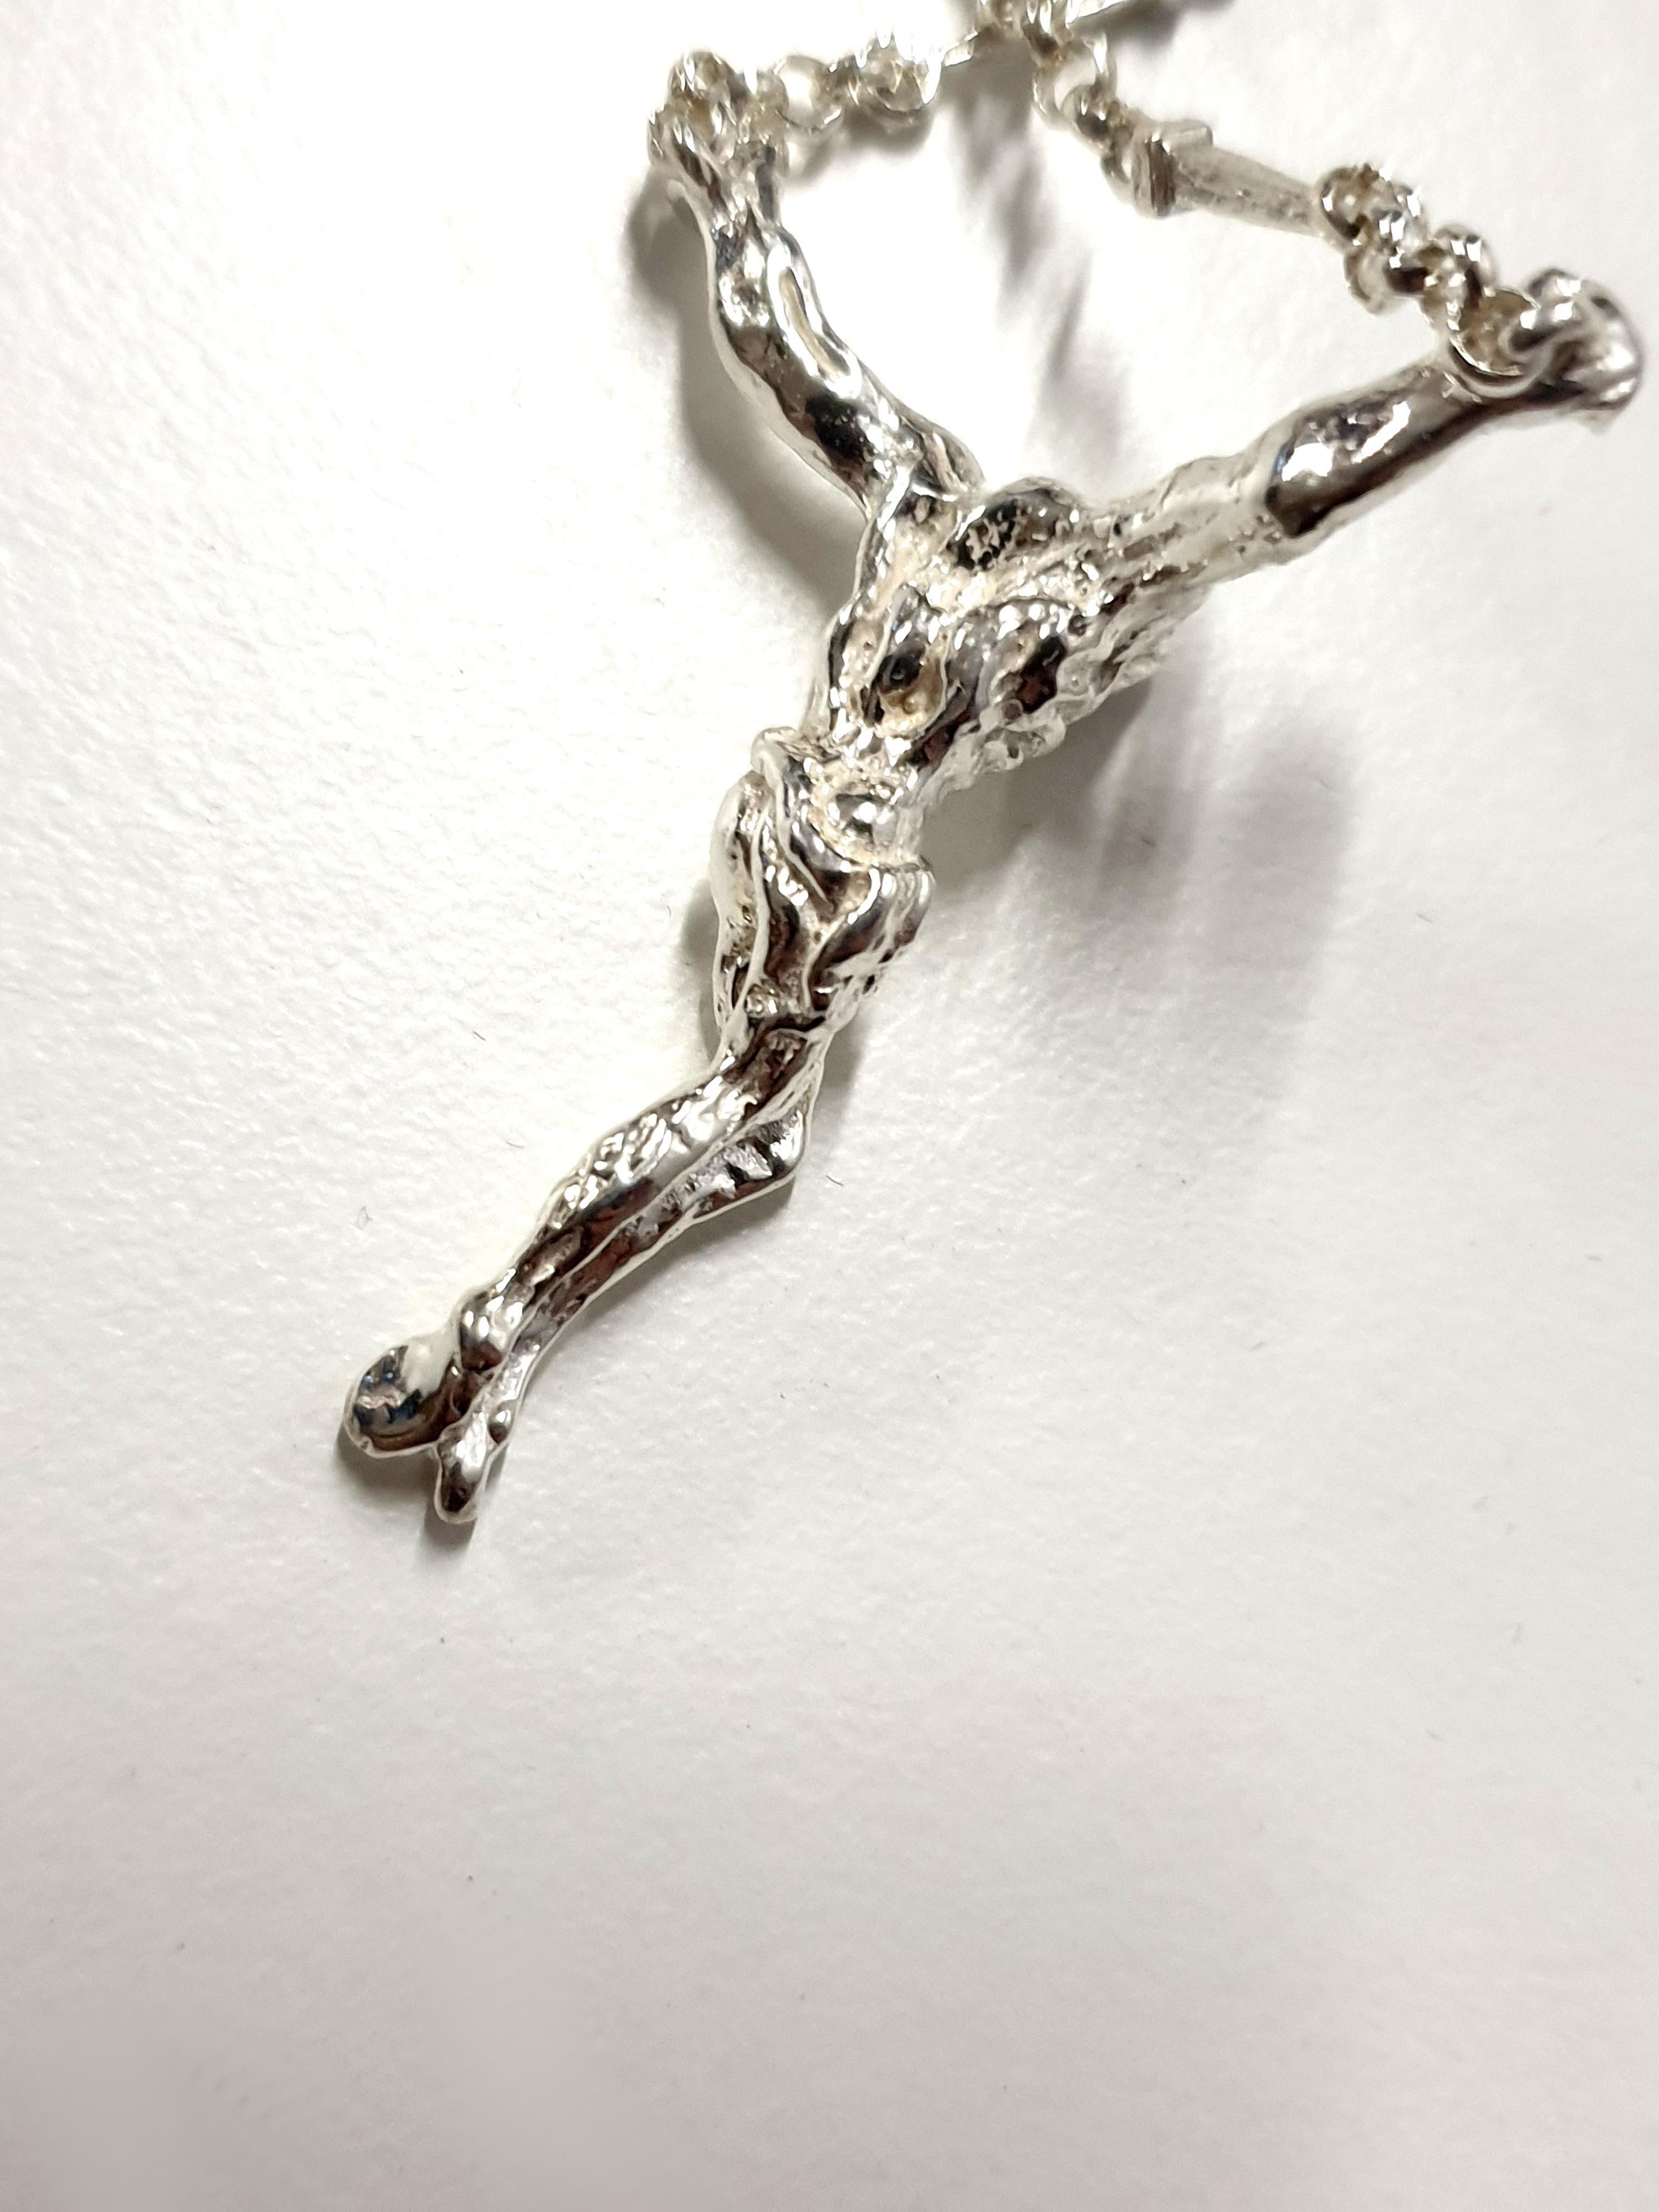 Salvador Dali - Christ - Signed Silver Necklace
1970
This exclusive necklace is a creation by the hands of famous artist Salvador Dali. The necklace is a symbol from one of his paintings. The Christ of Saint John of the Cross (Spanish: El Cristo de